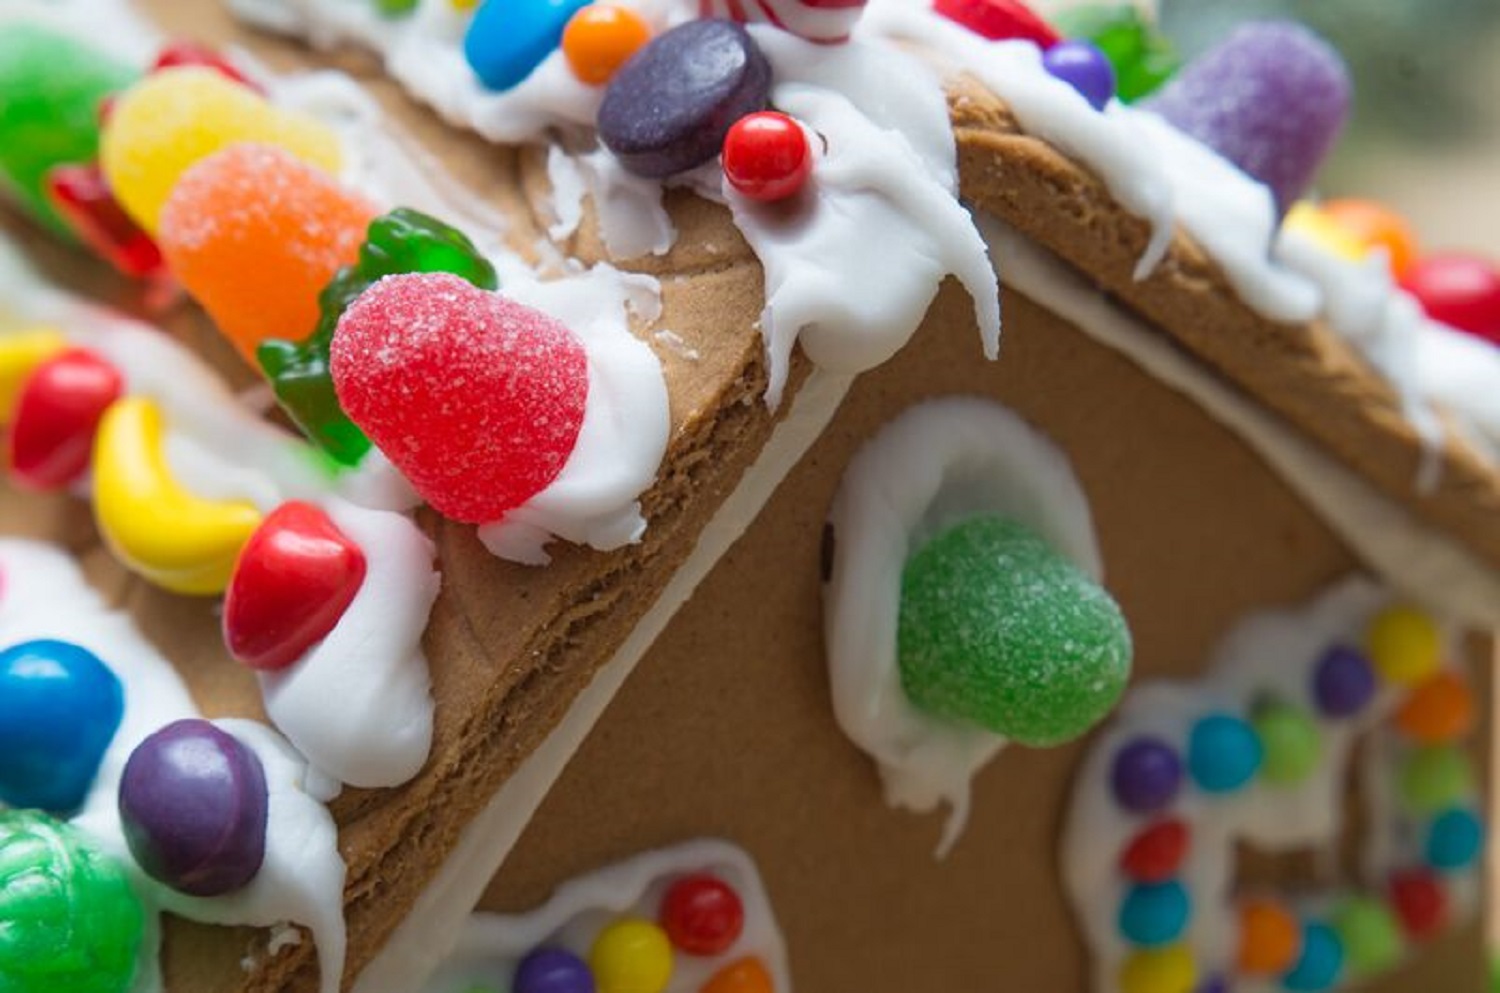 Making gingerbread houses also makes for fun winter date ideas.